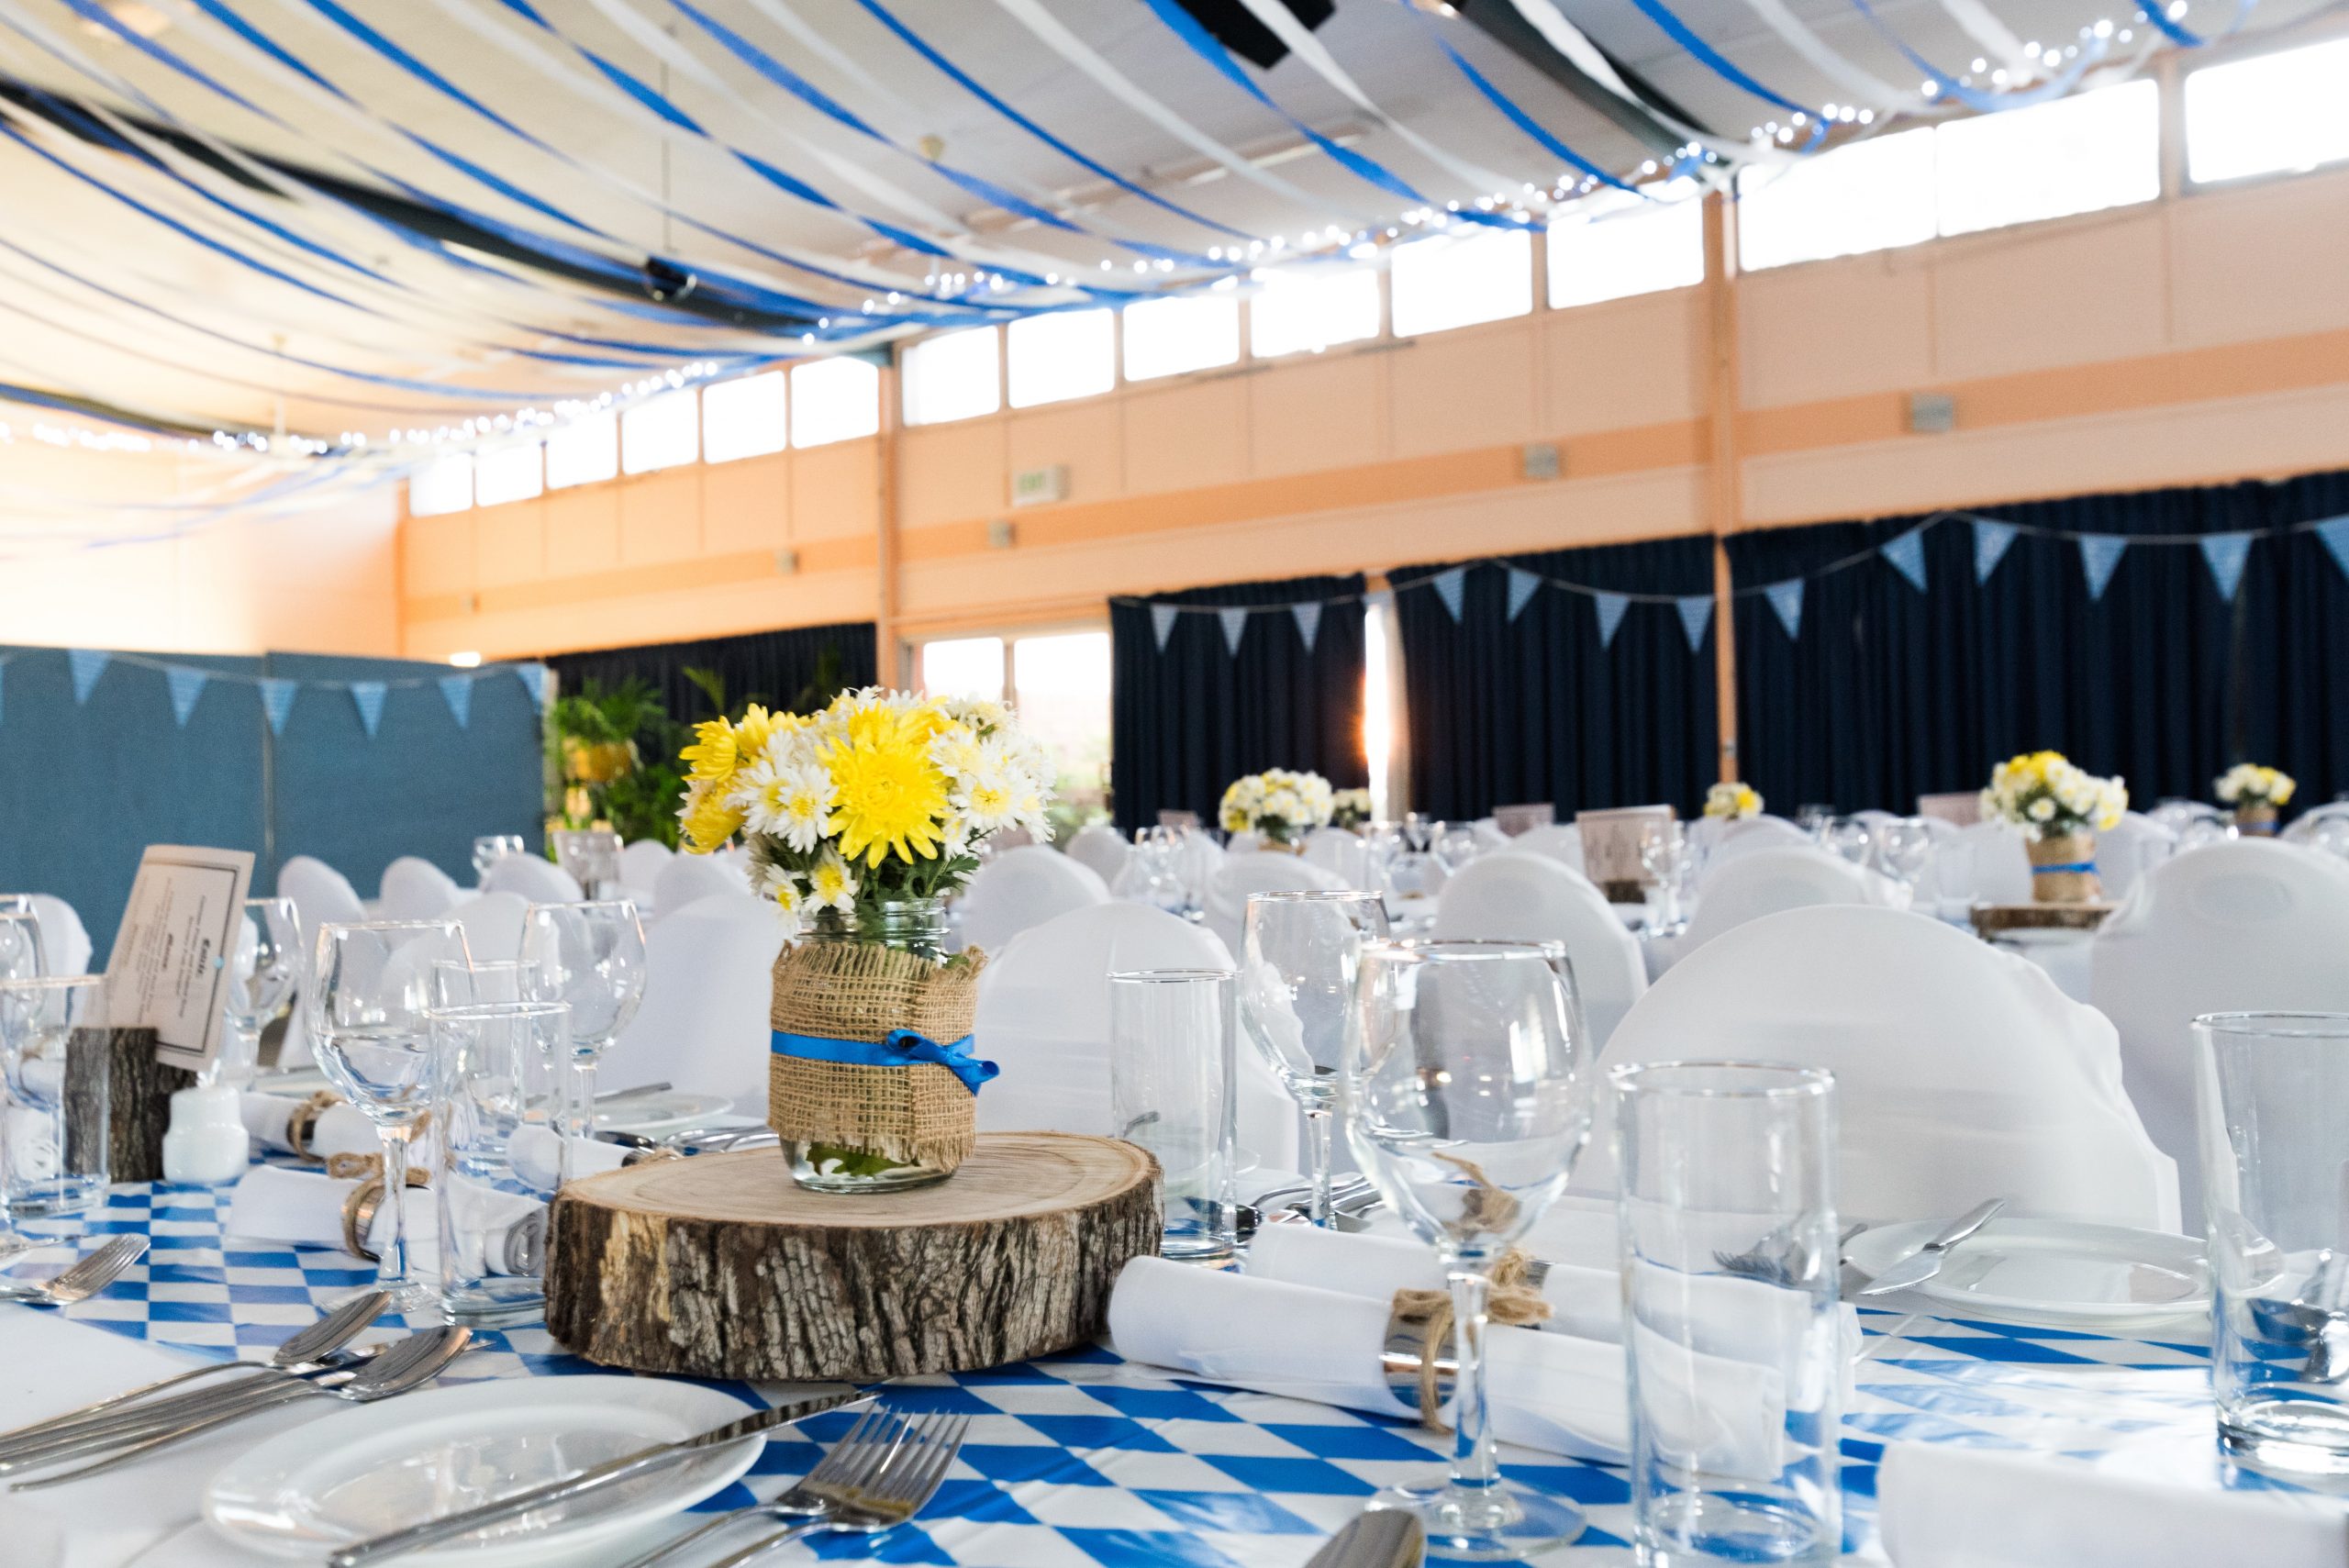 Organize Your Events Successfully by Hiring an Event Management Services